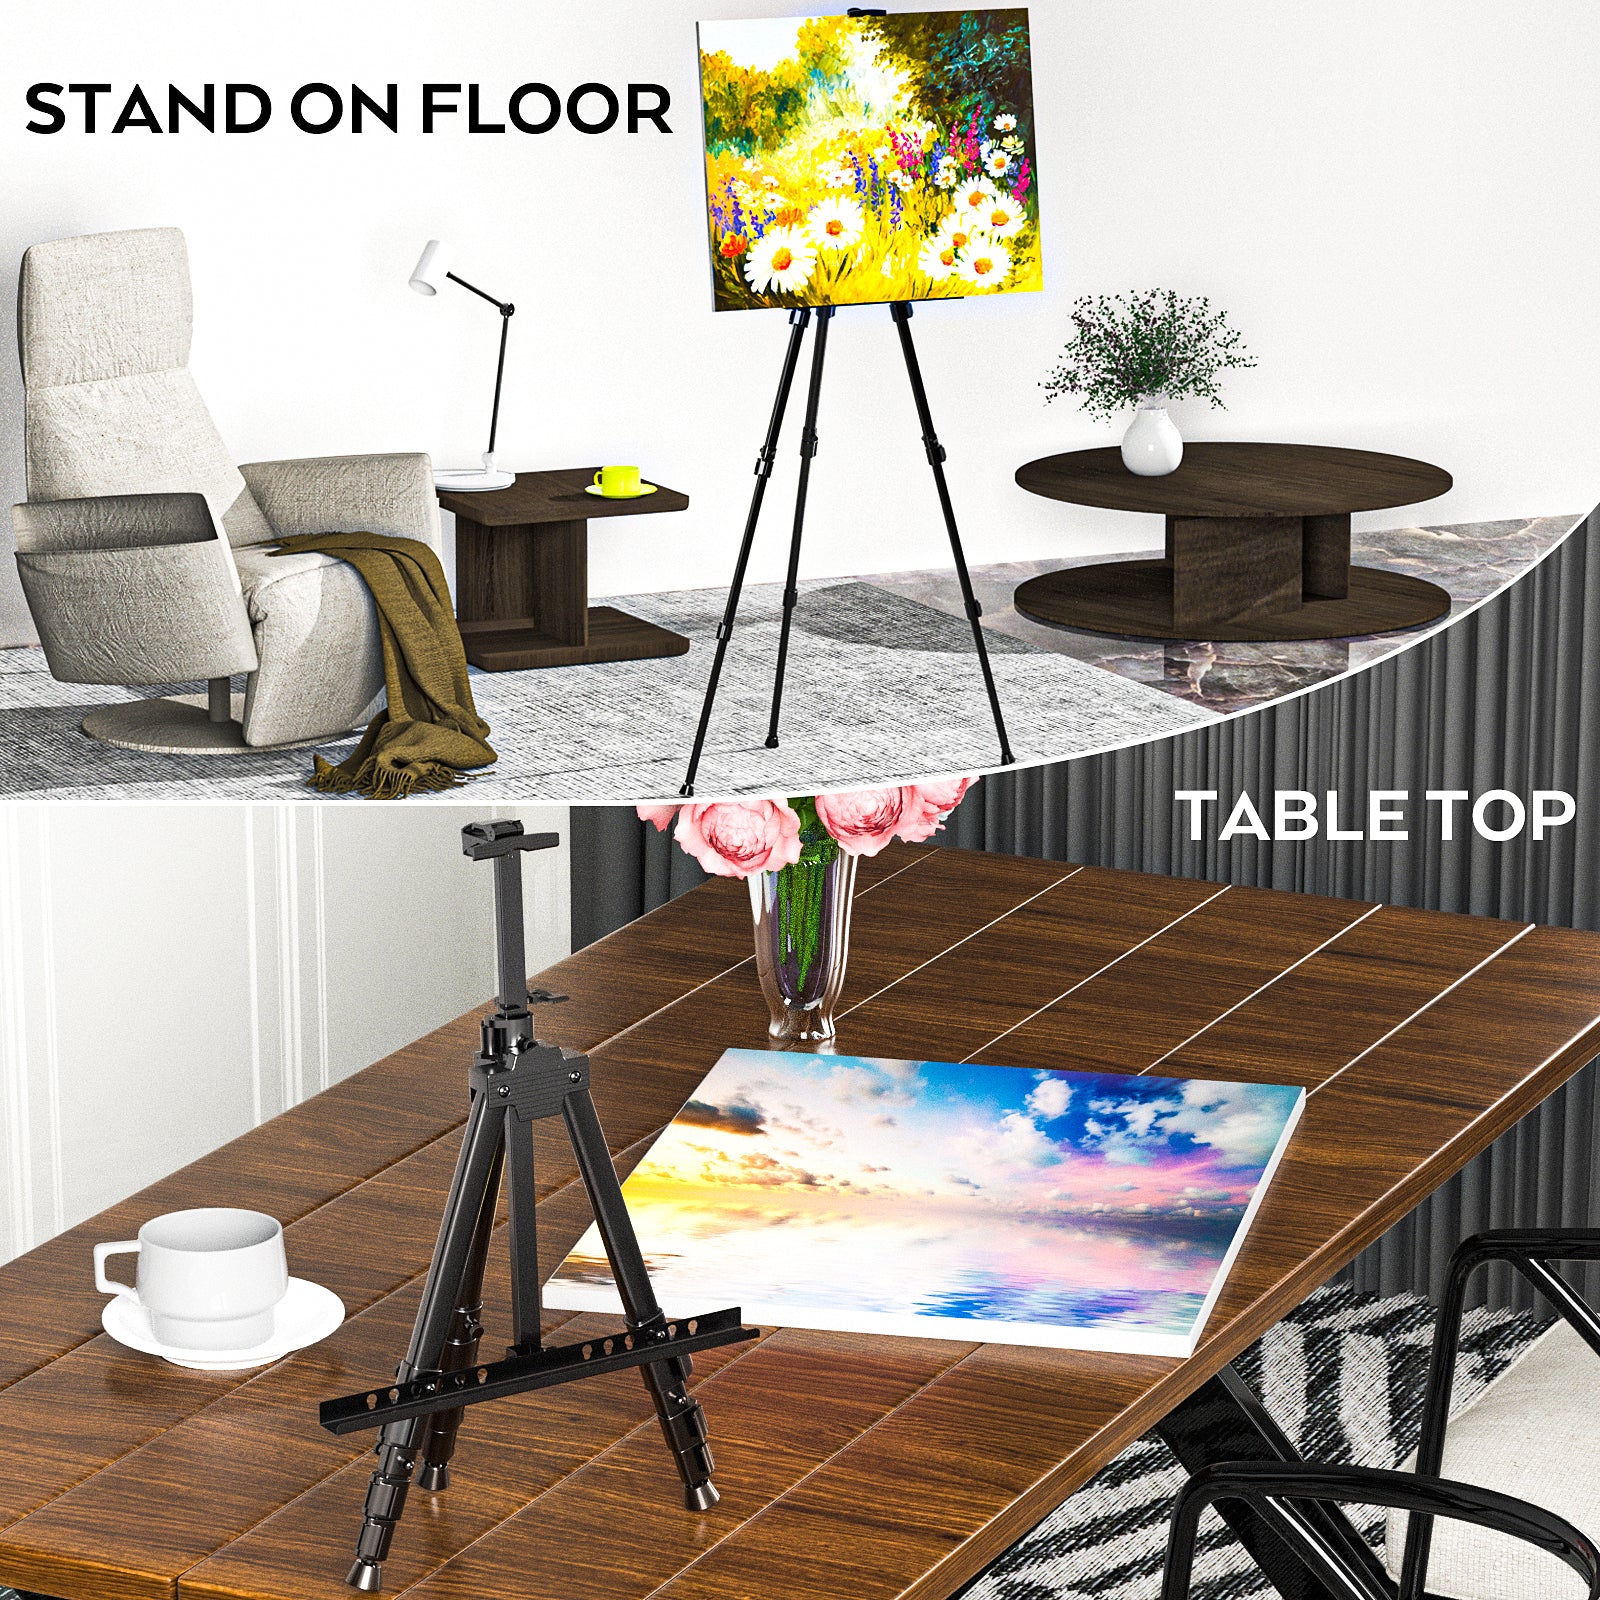 Floor poster board stands and Easels